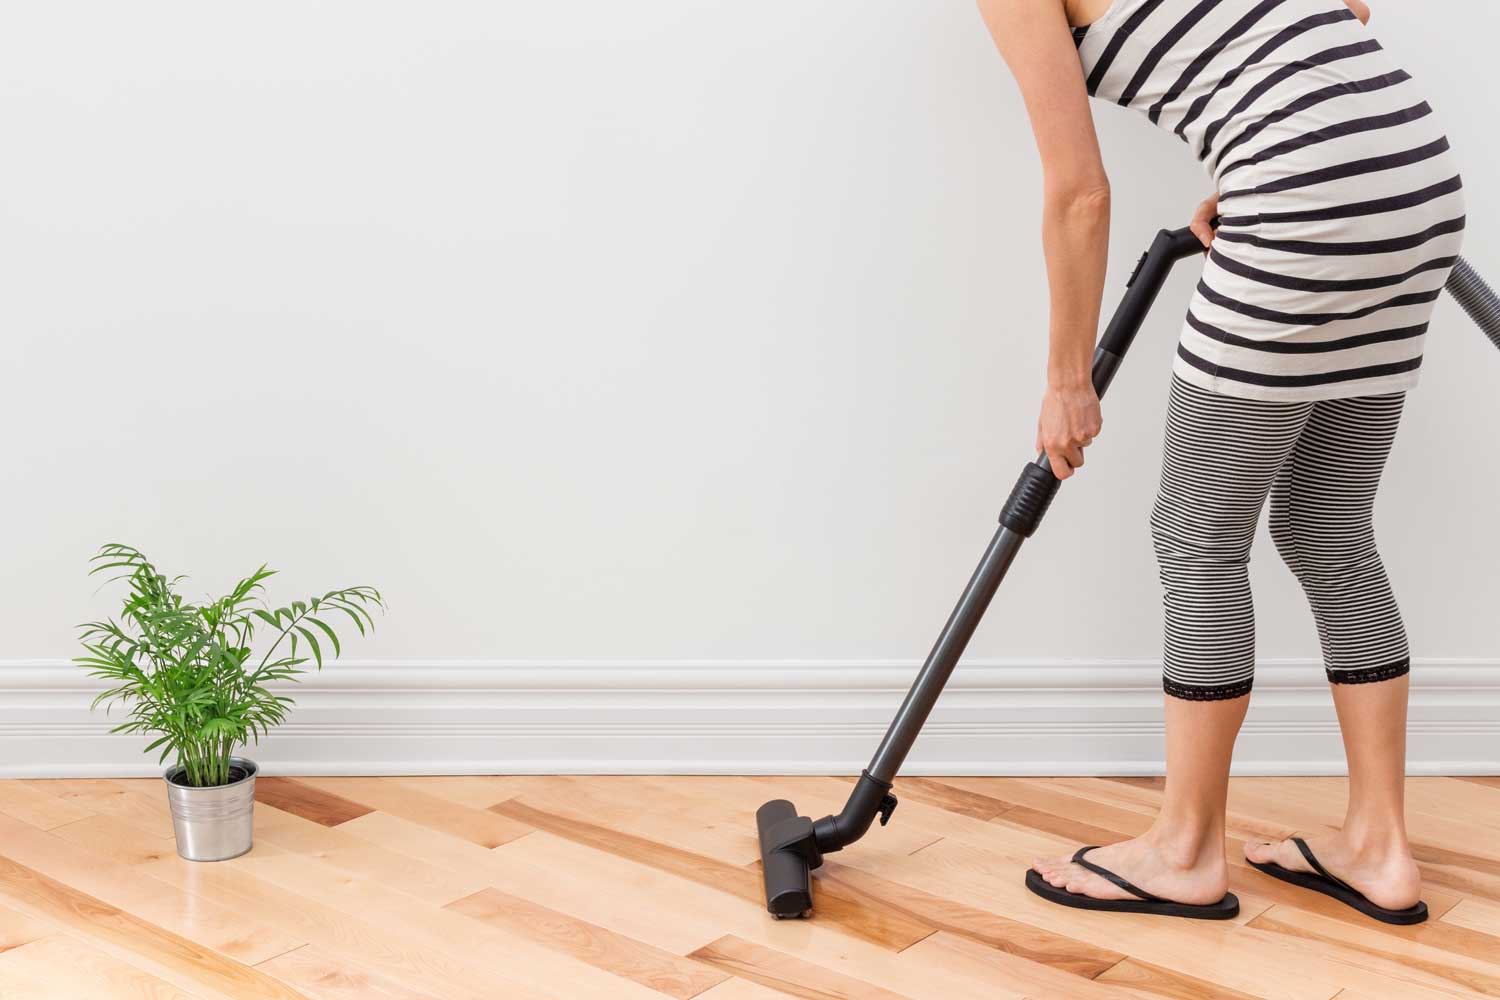 Regulary vacuum or sweep floors to remove dirt and keep your home floors looking amazing - tips from Footprints Floors in Sarasota / Venice.